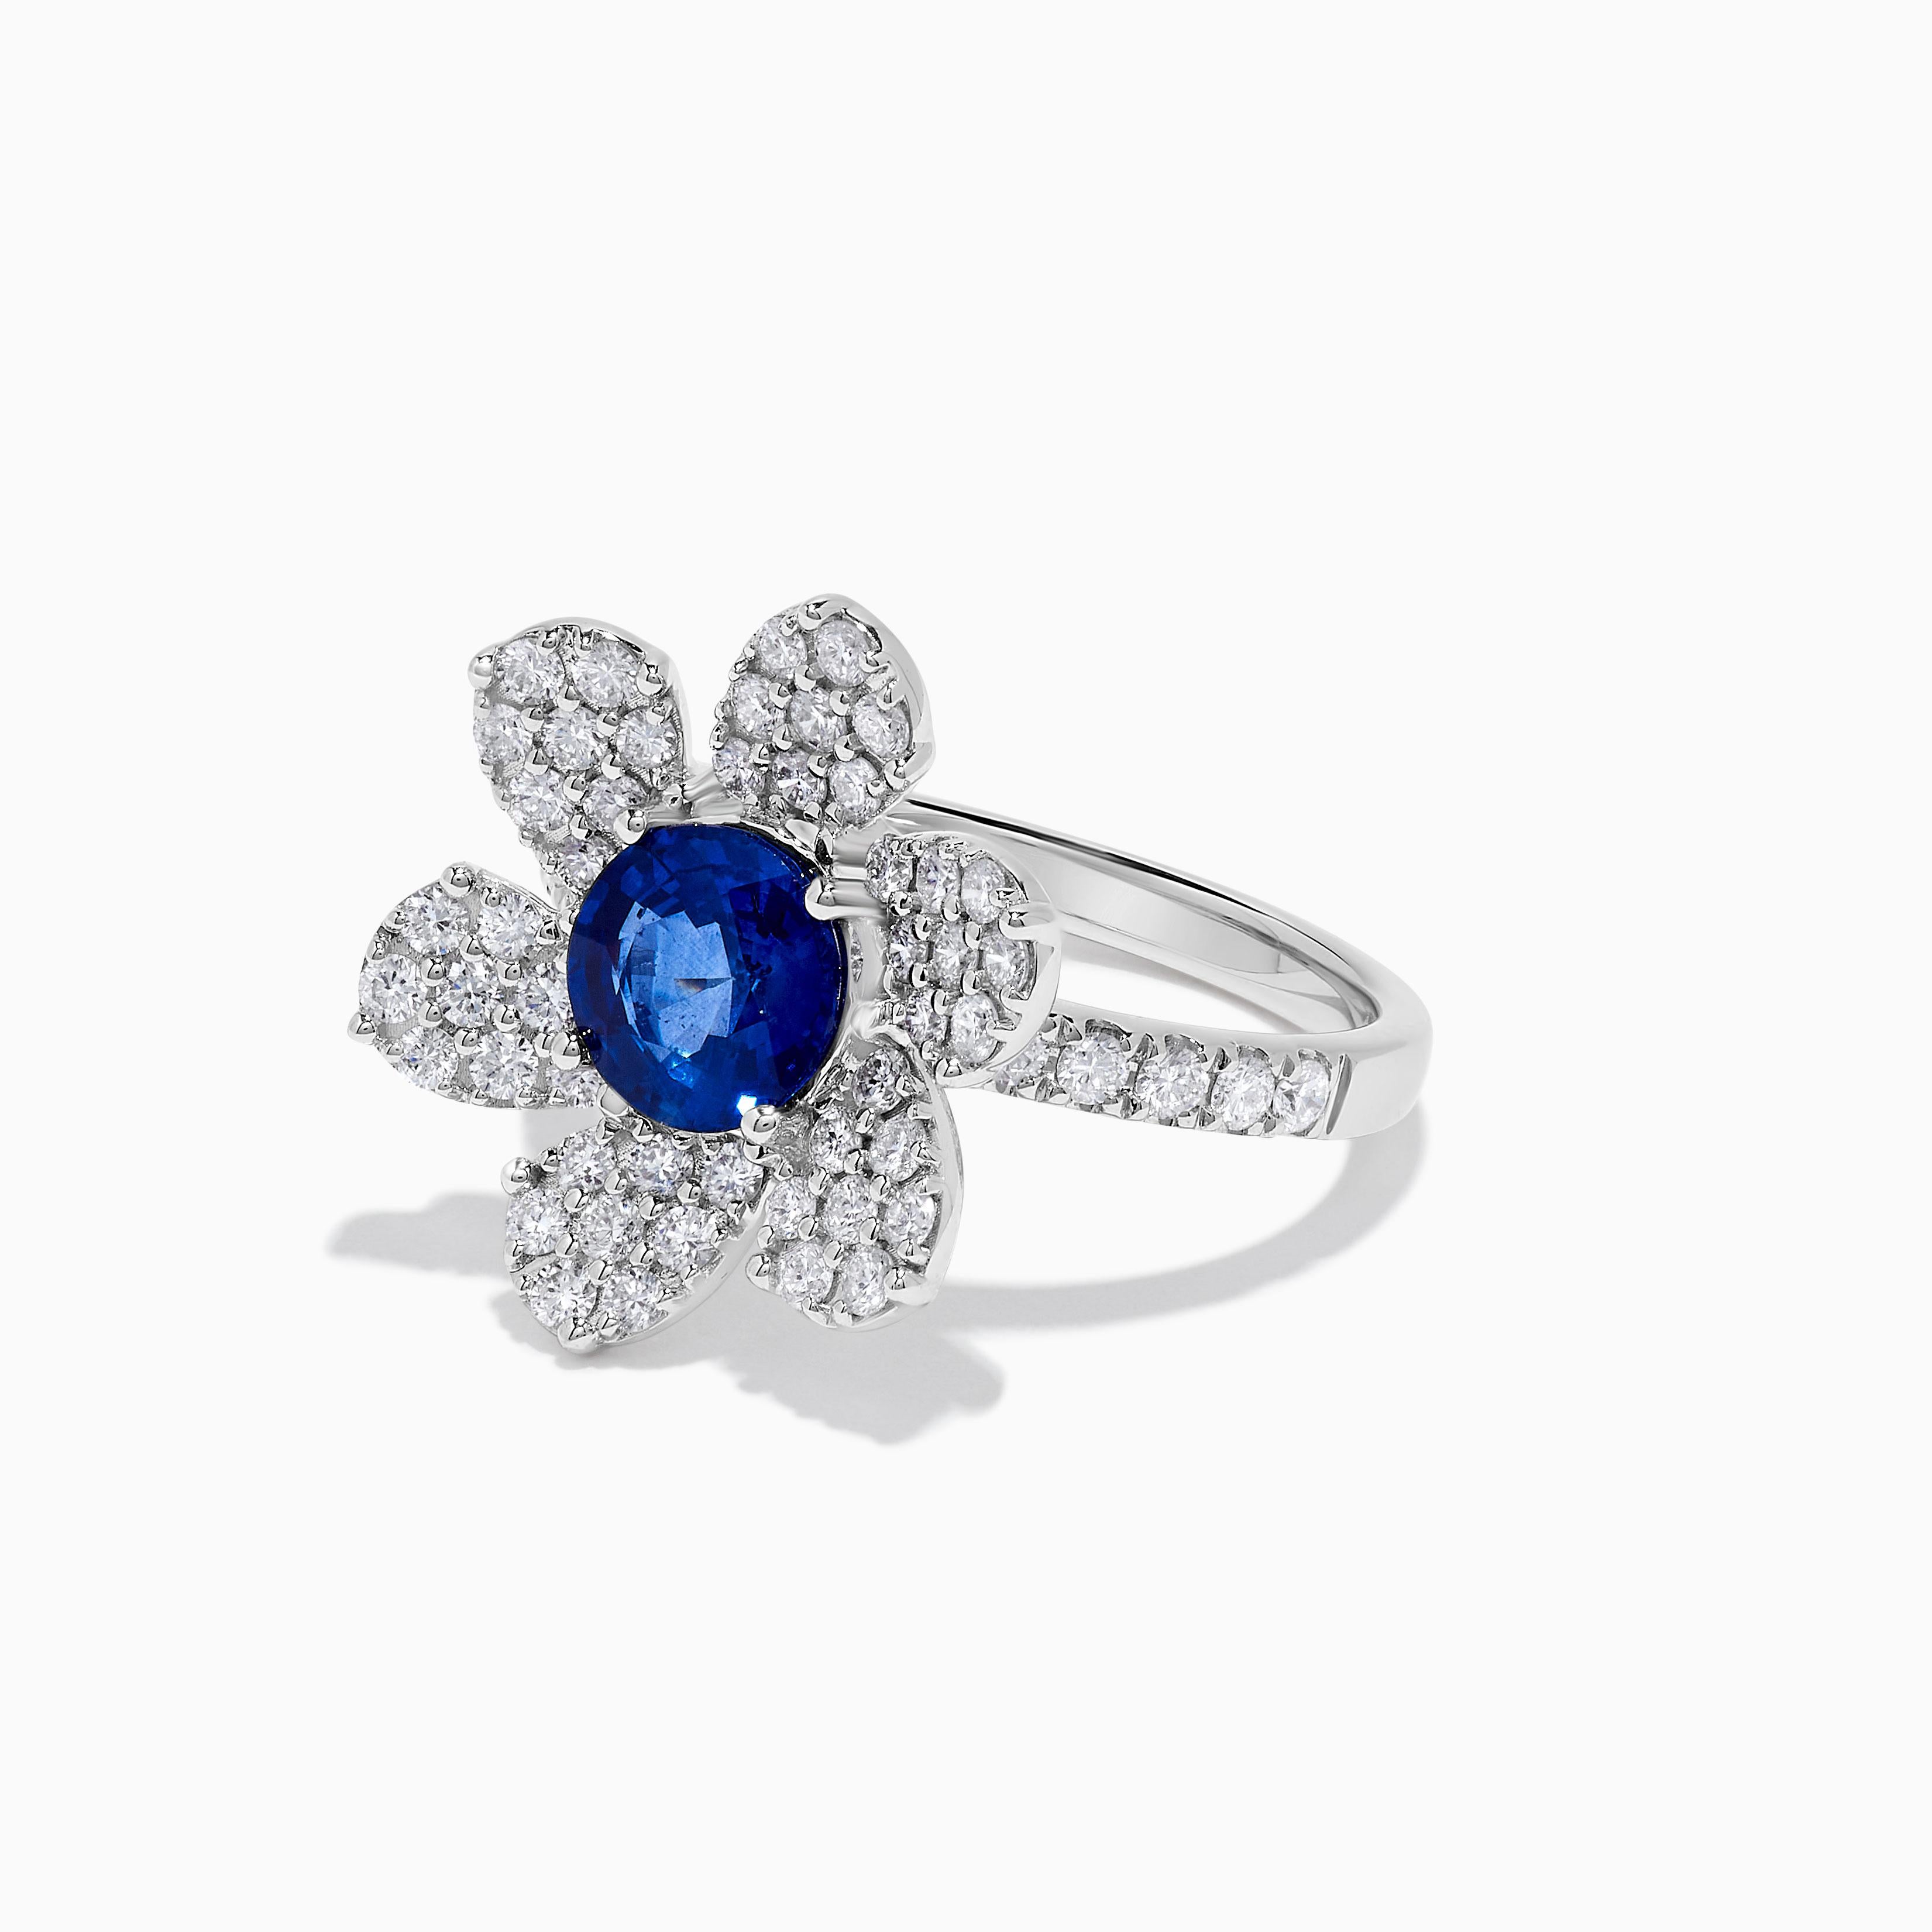 RareGemWorld's classic sapphire ring. Mounted in a beautiful 18K White Gold setting with a natural round cut blue sapphire. The sapphire is surrounded by natural round white diamond melee. This ring is guaranteed to impress and enhance your personal